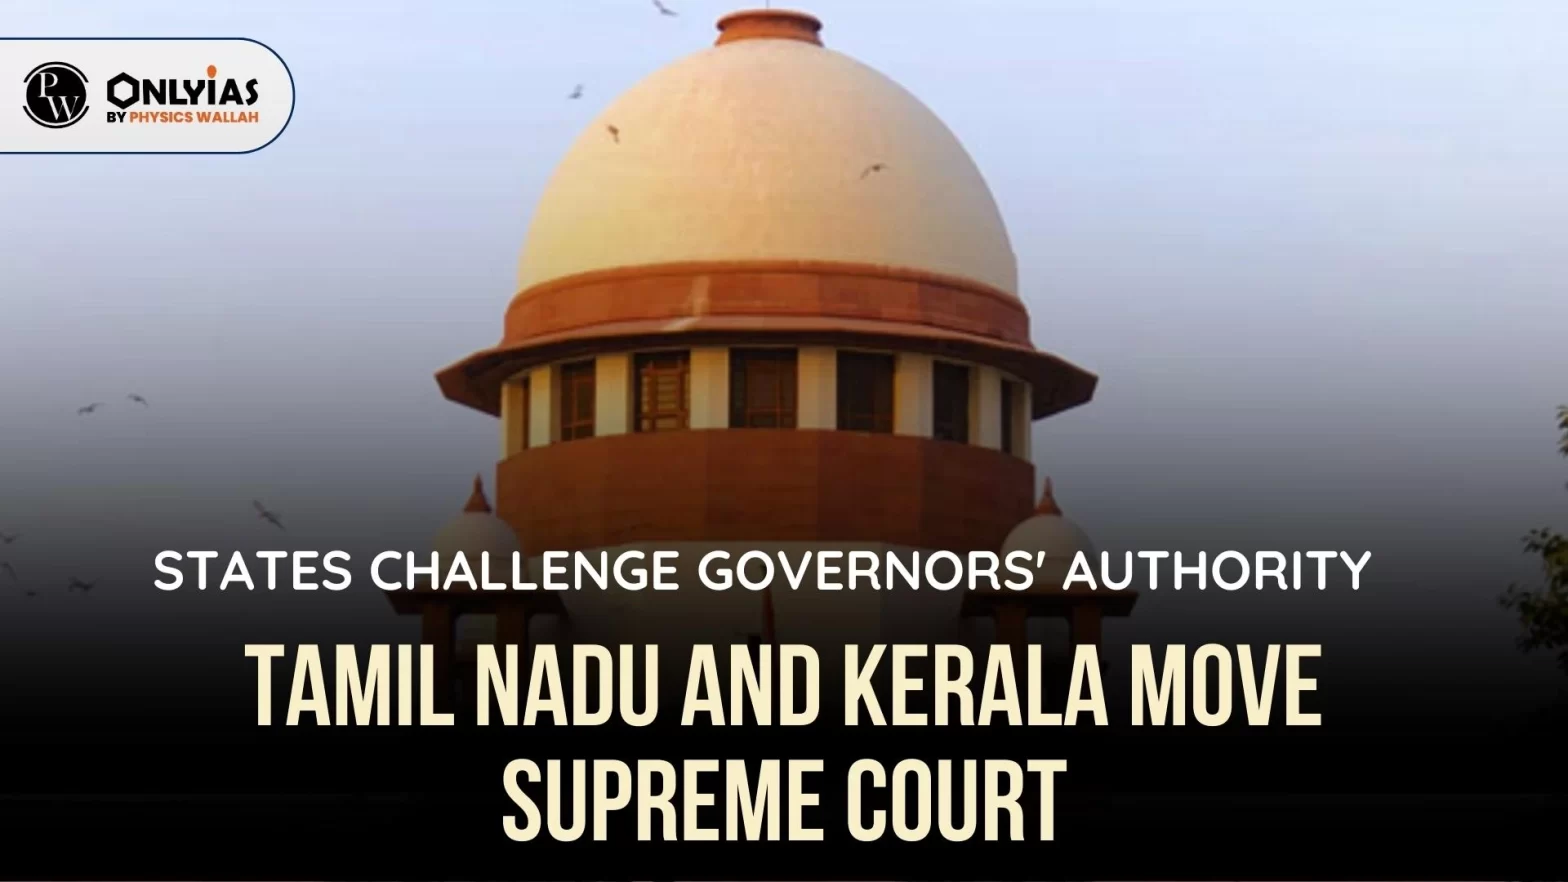 States Challenge Governors’ Authority: Tamil Nadu and Kerala Move Supreme Court